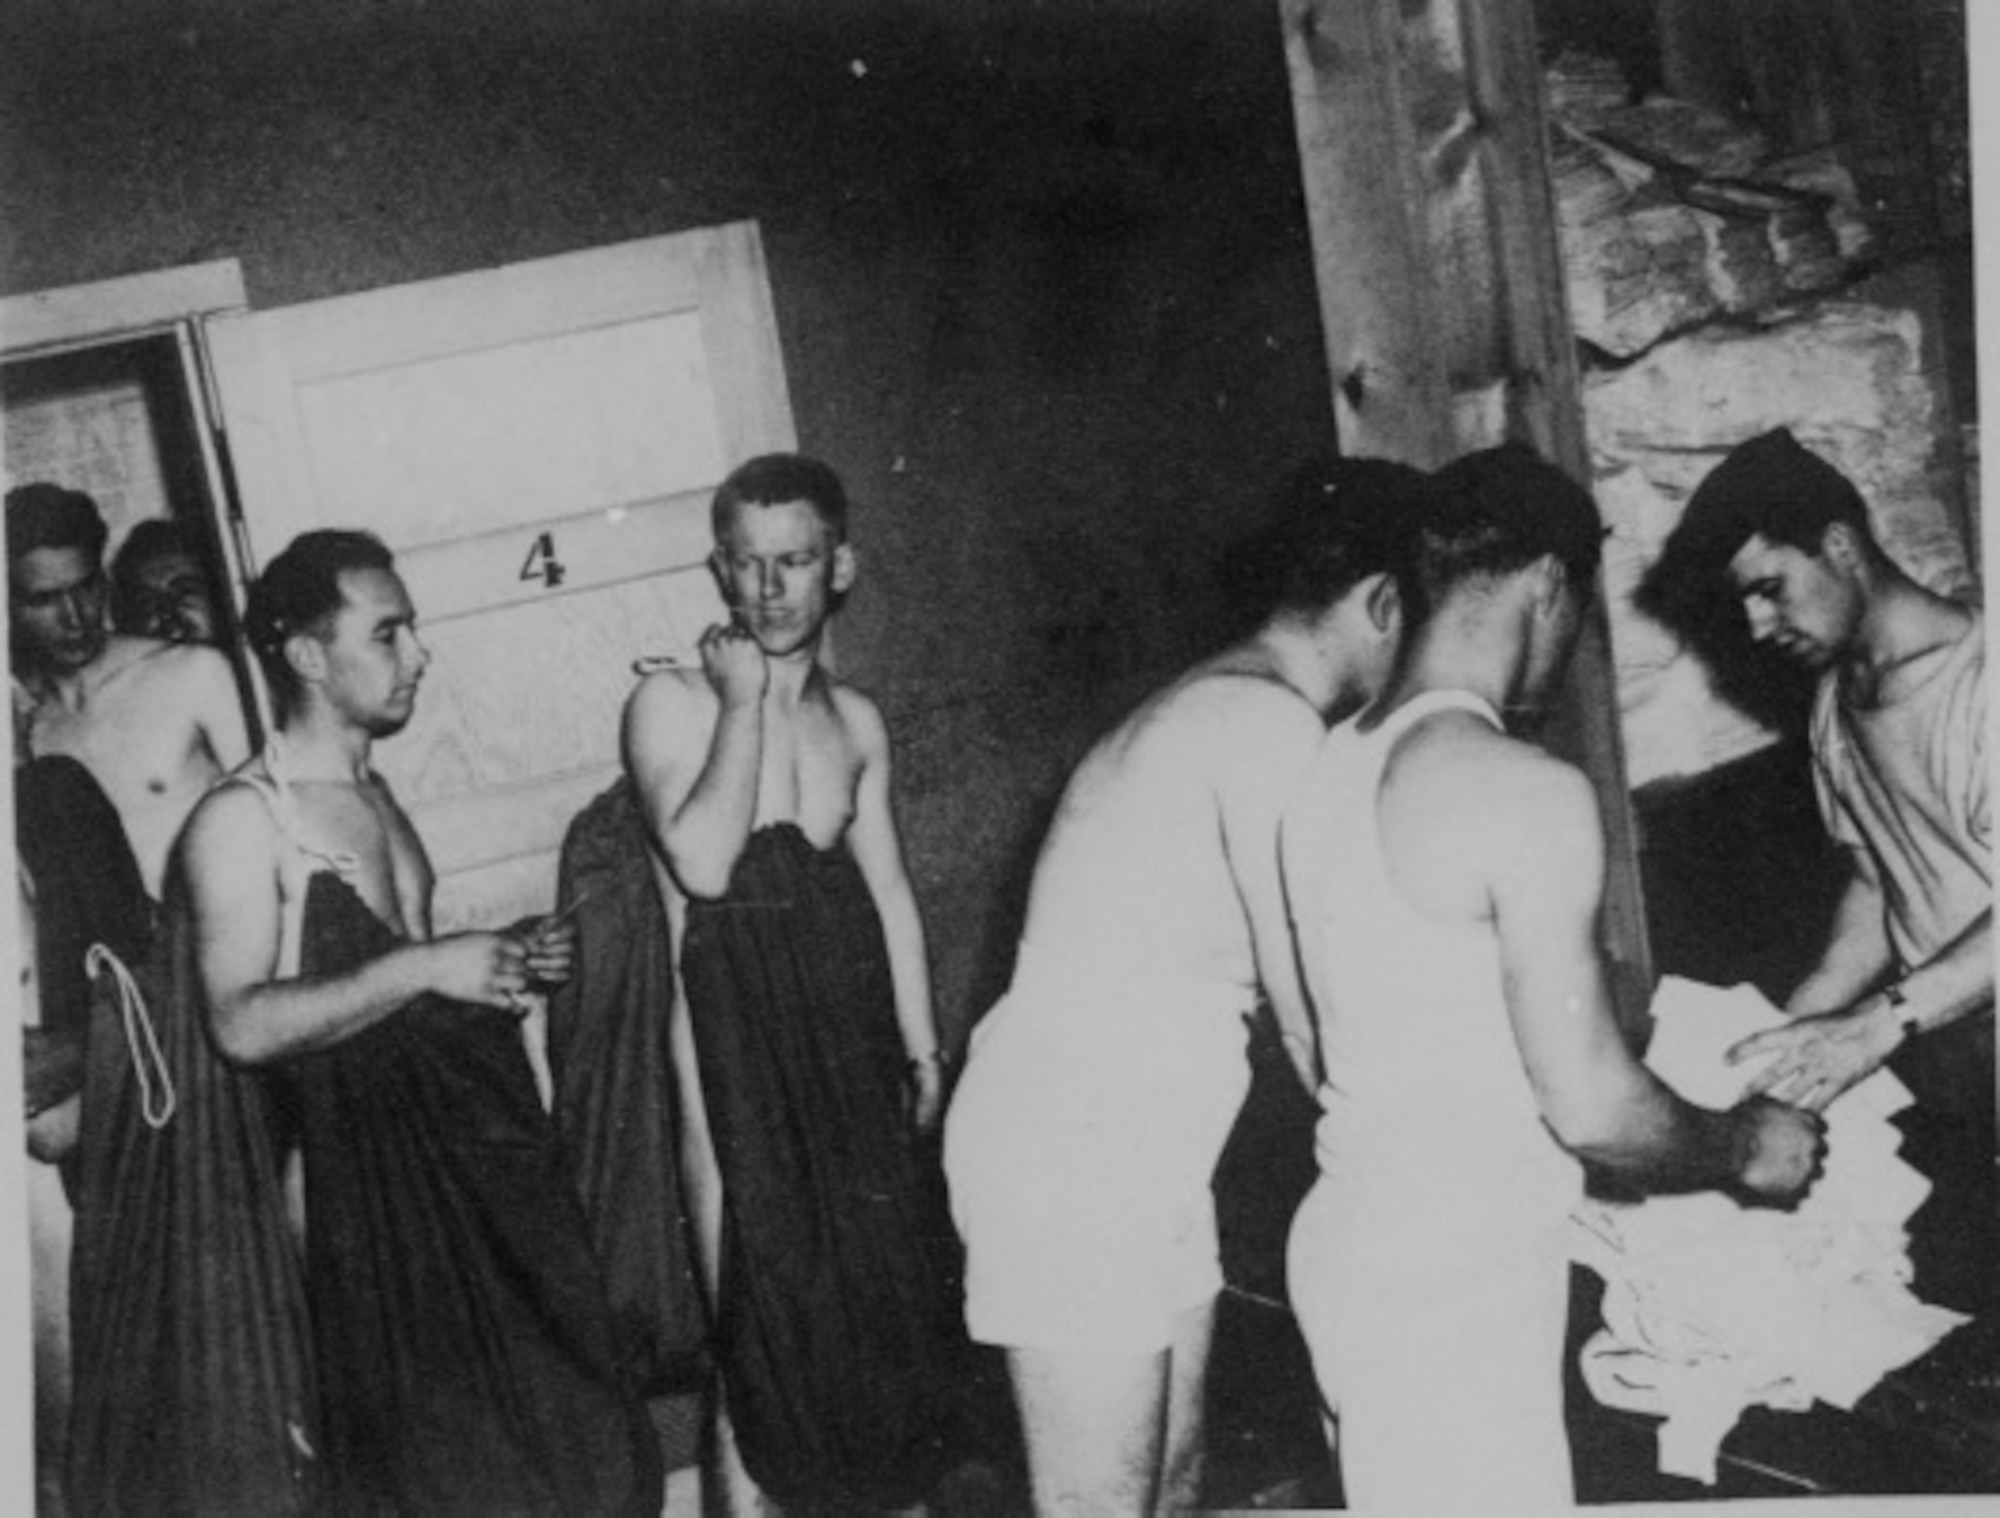 Trainees receive initial clothing issue during basic training at Buckley Field in 1943. (Courtesy Photo)